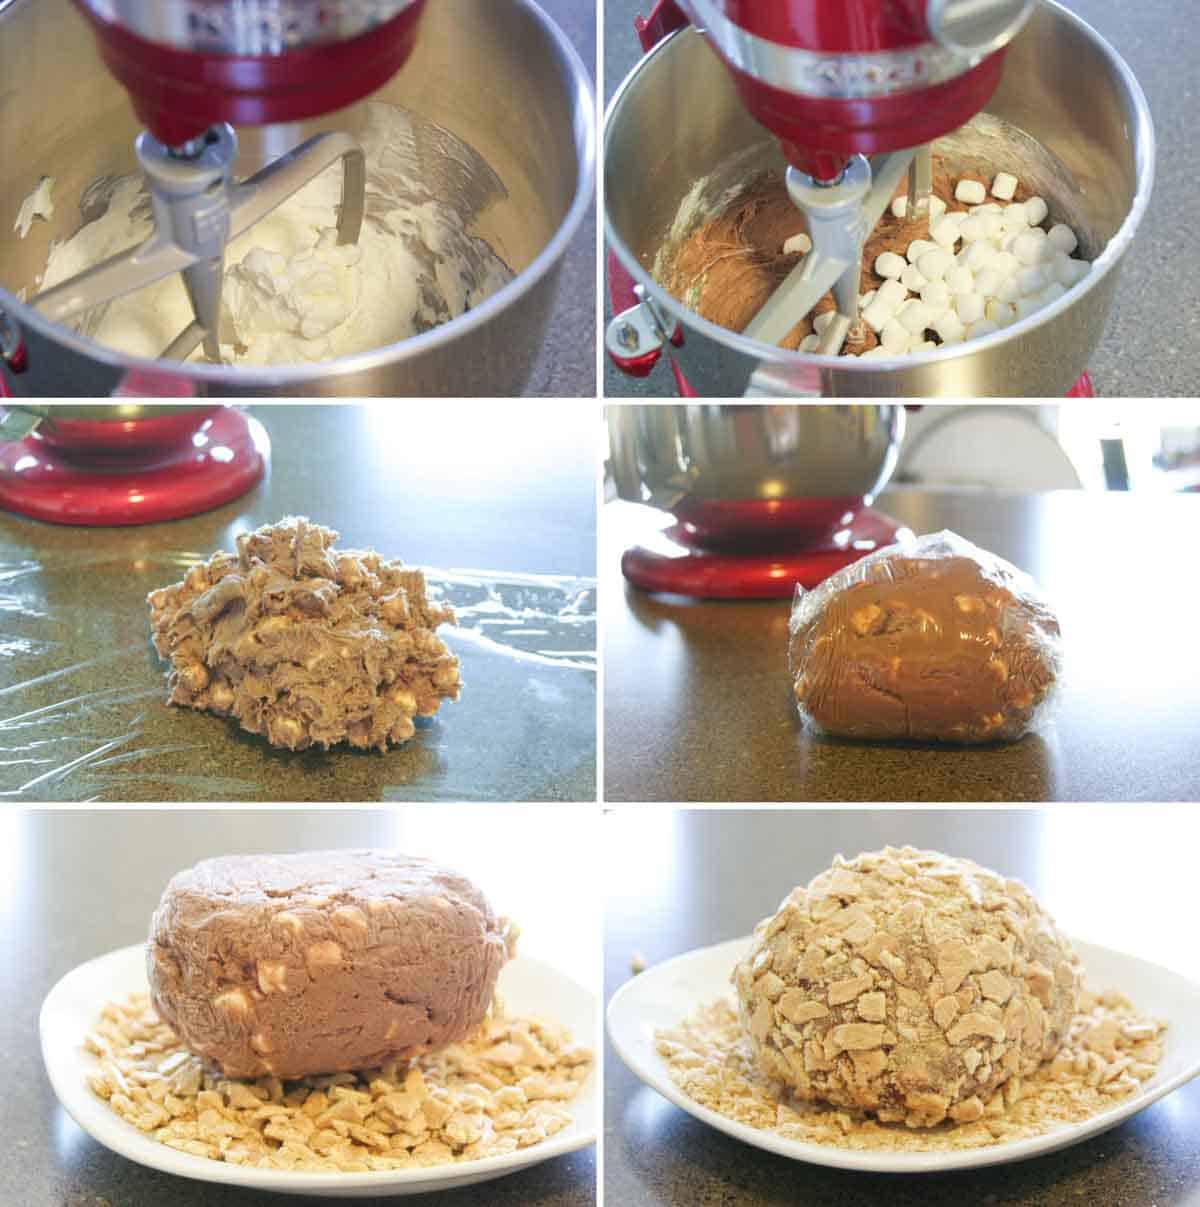 Steps to make a s'mores cheese ball.